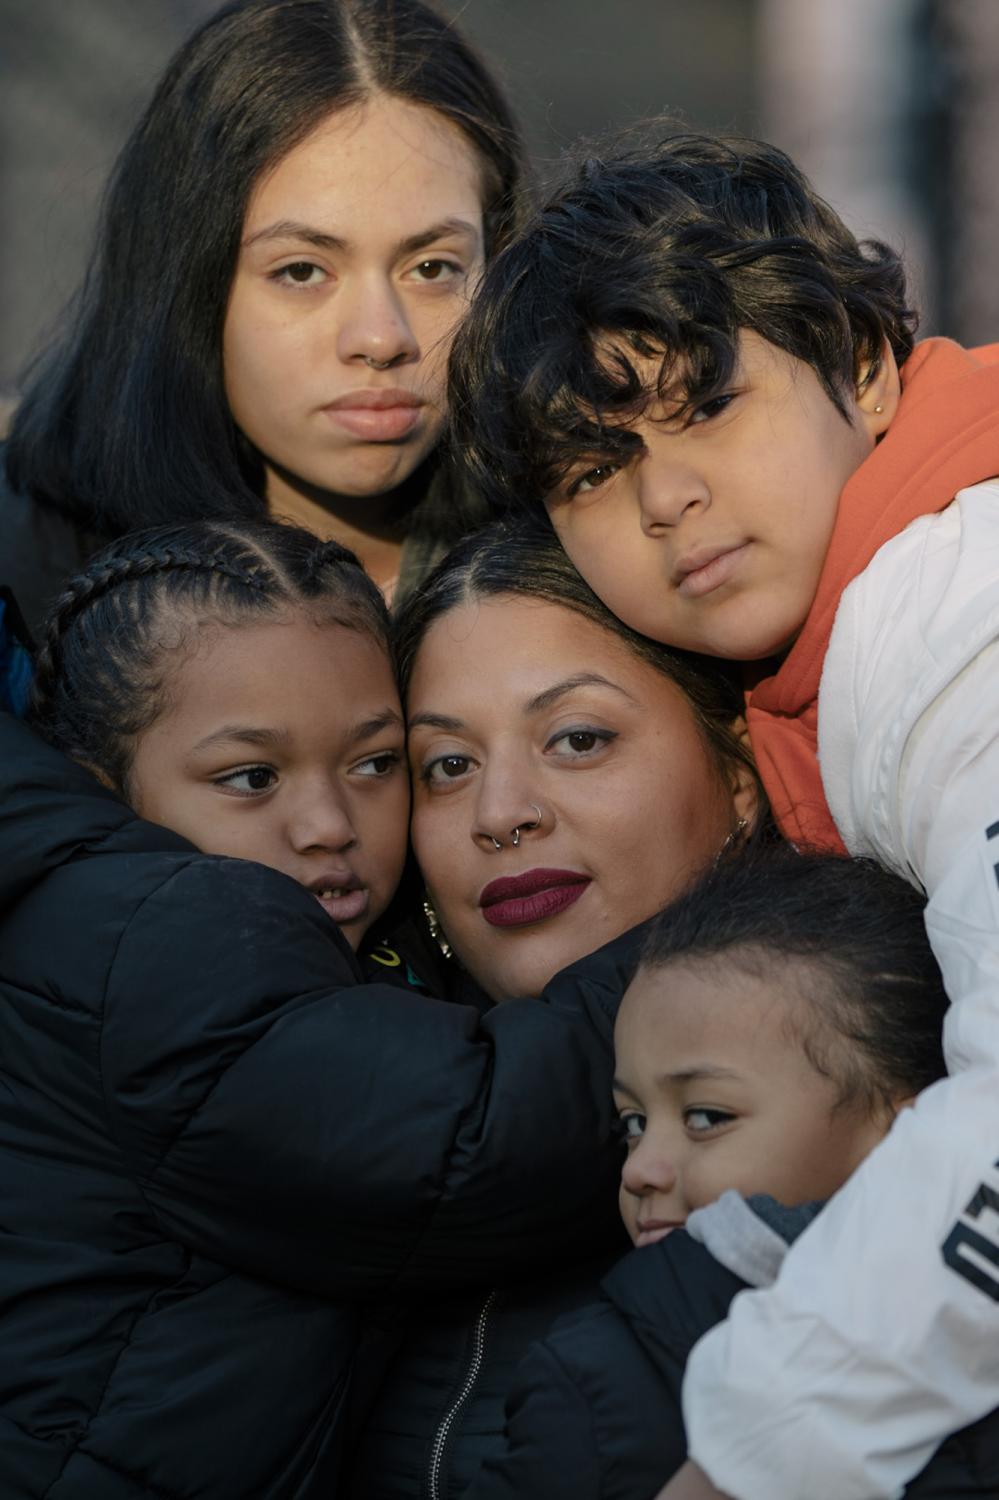 New York City, New York &mdash; December 10, 2020: Karen Roman with her children Zeniah Lopez, Joel Rodriguez, King Browing, and Kamren Browing outside of their old apartment on E118th Street in Spanish Harlem. After a car accident and the COVID-19 pandemic derailed Karen Roman&rsquo;s college plans, she has concentrated her energy on starting a makeup business to help provide for her young family. CREDIT: Jos&eacute; A. Alvarado Jr. for The New York Times